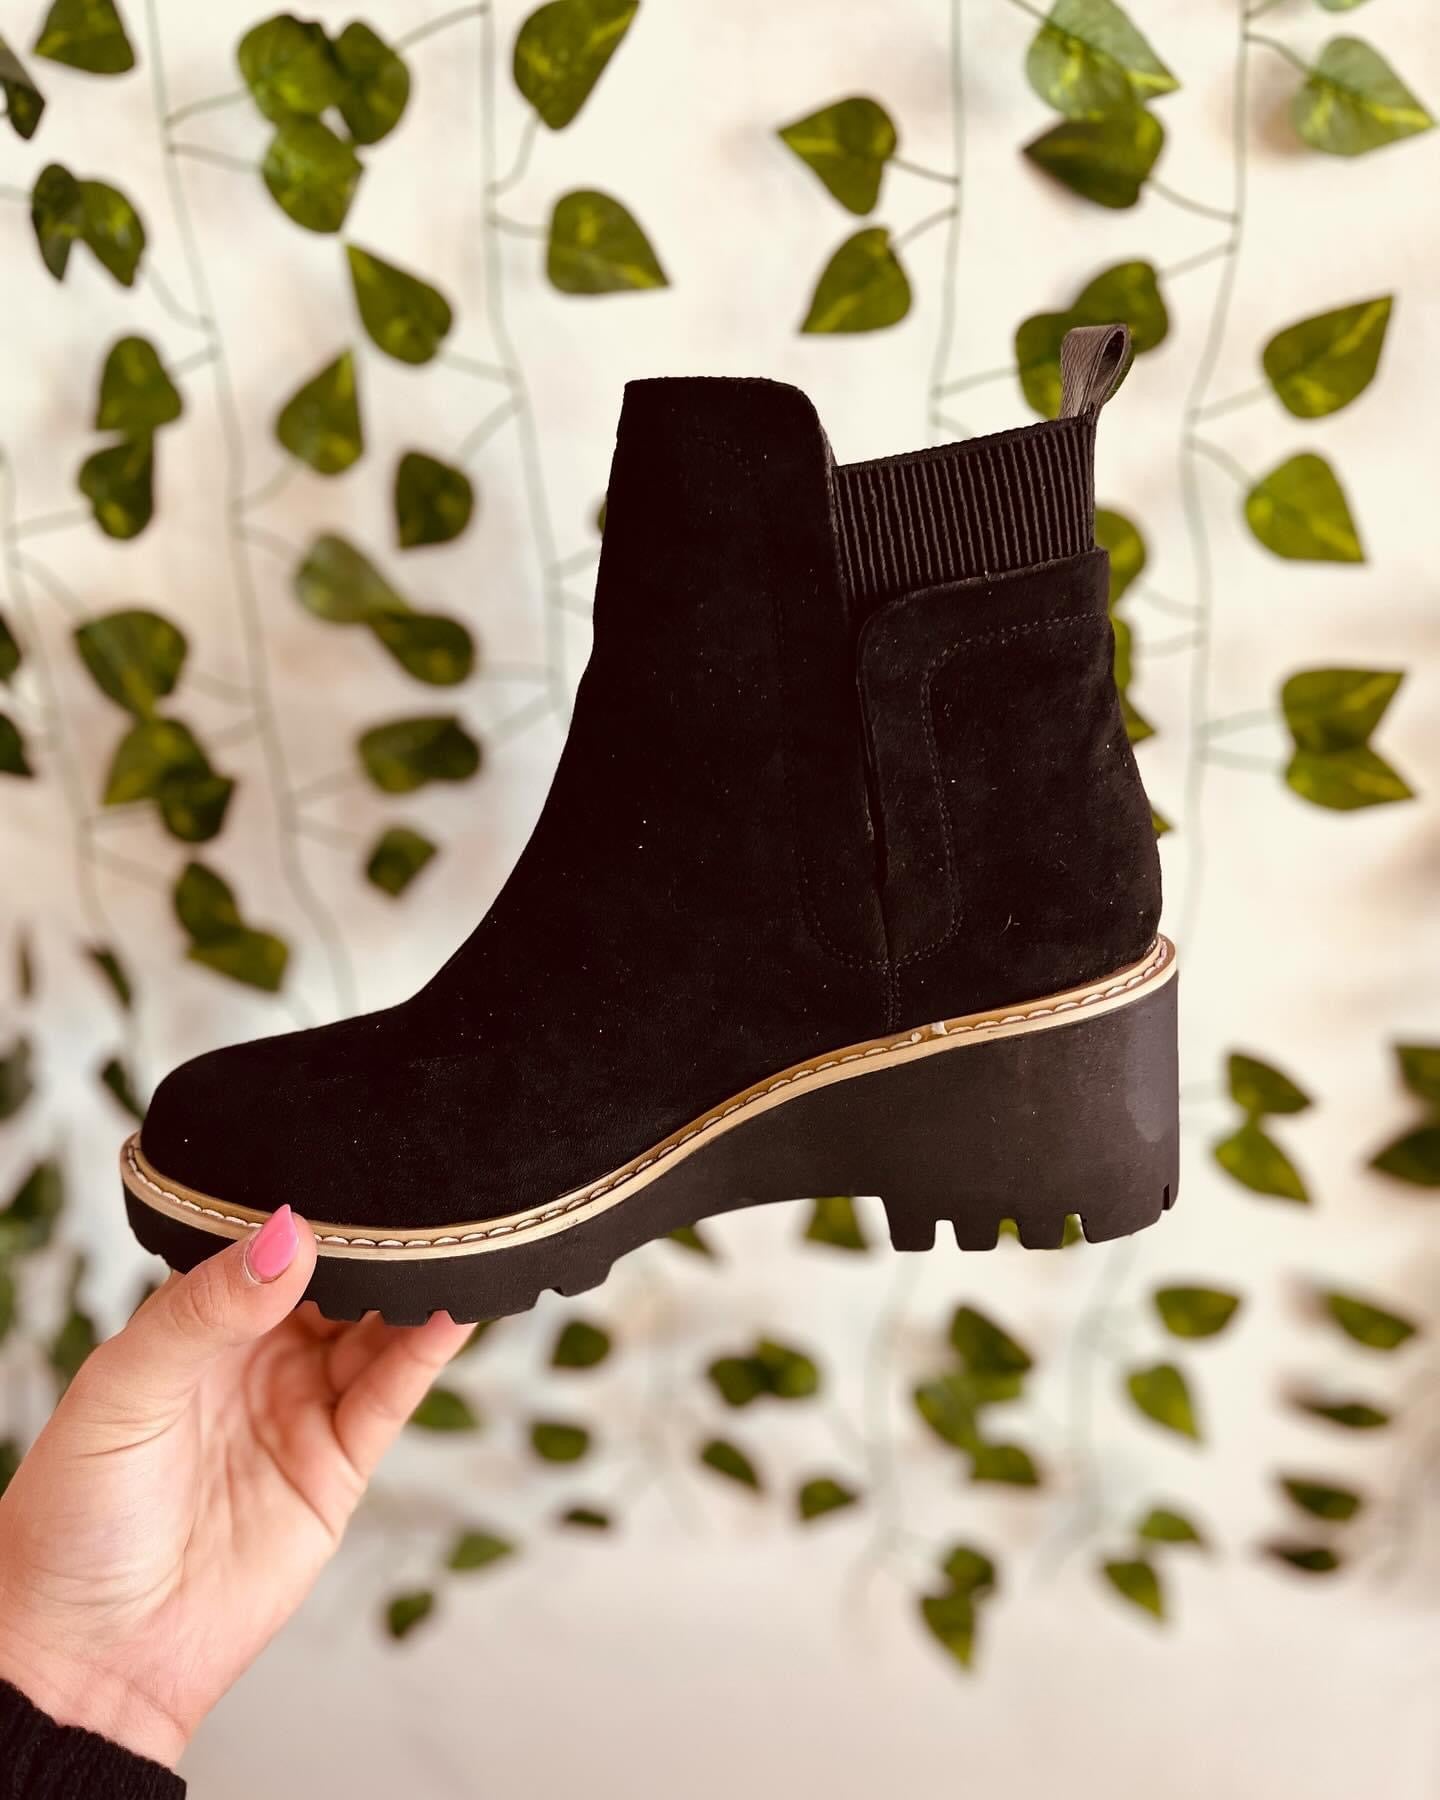 Better than Basic Black Suede Boots